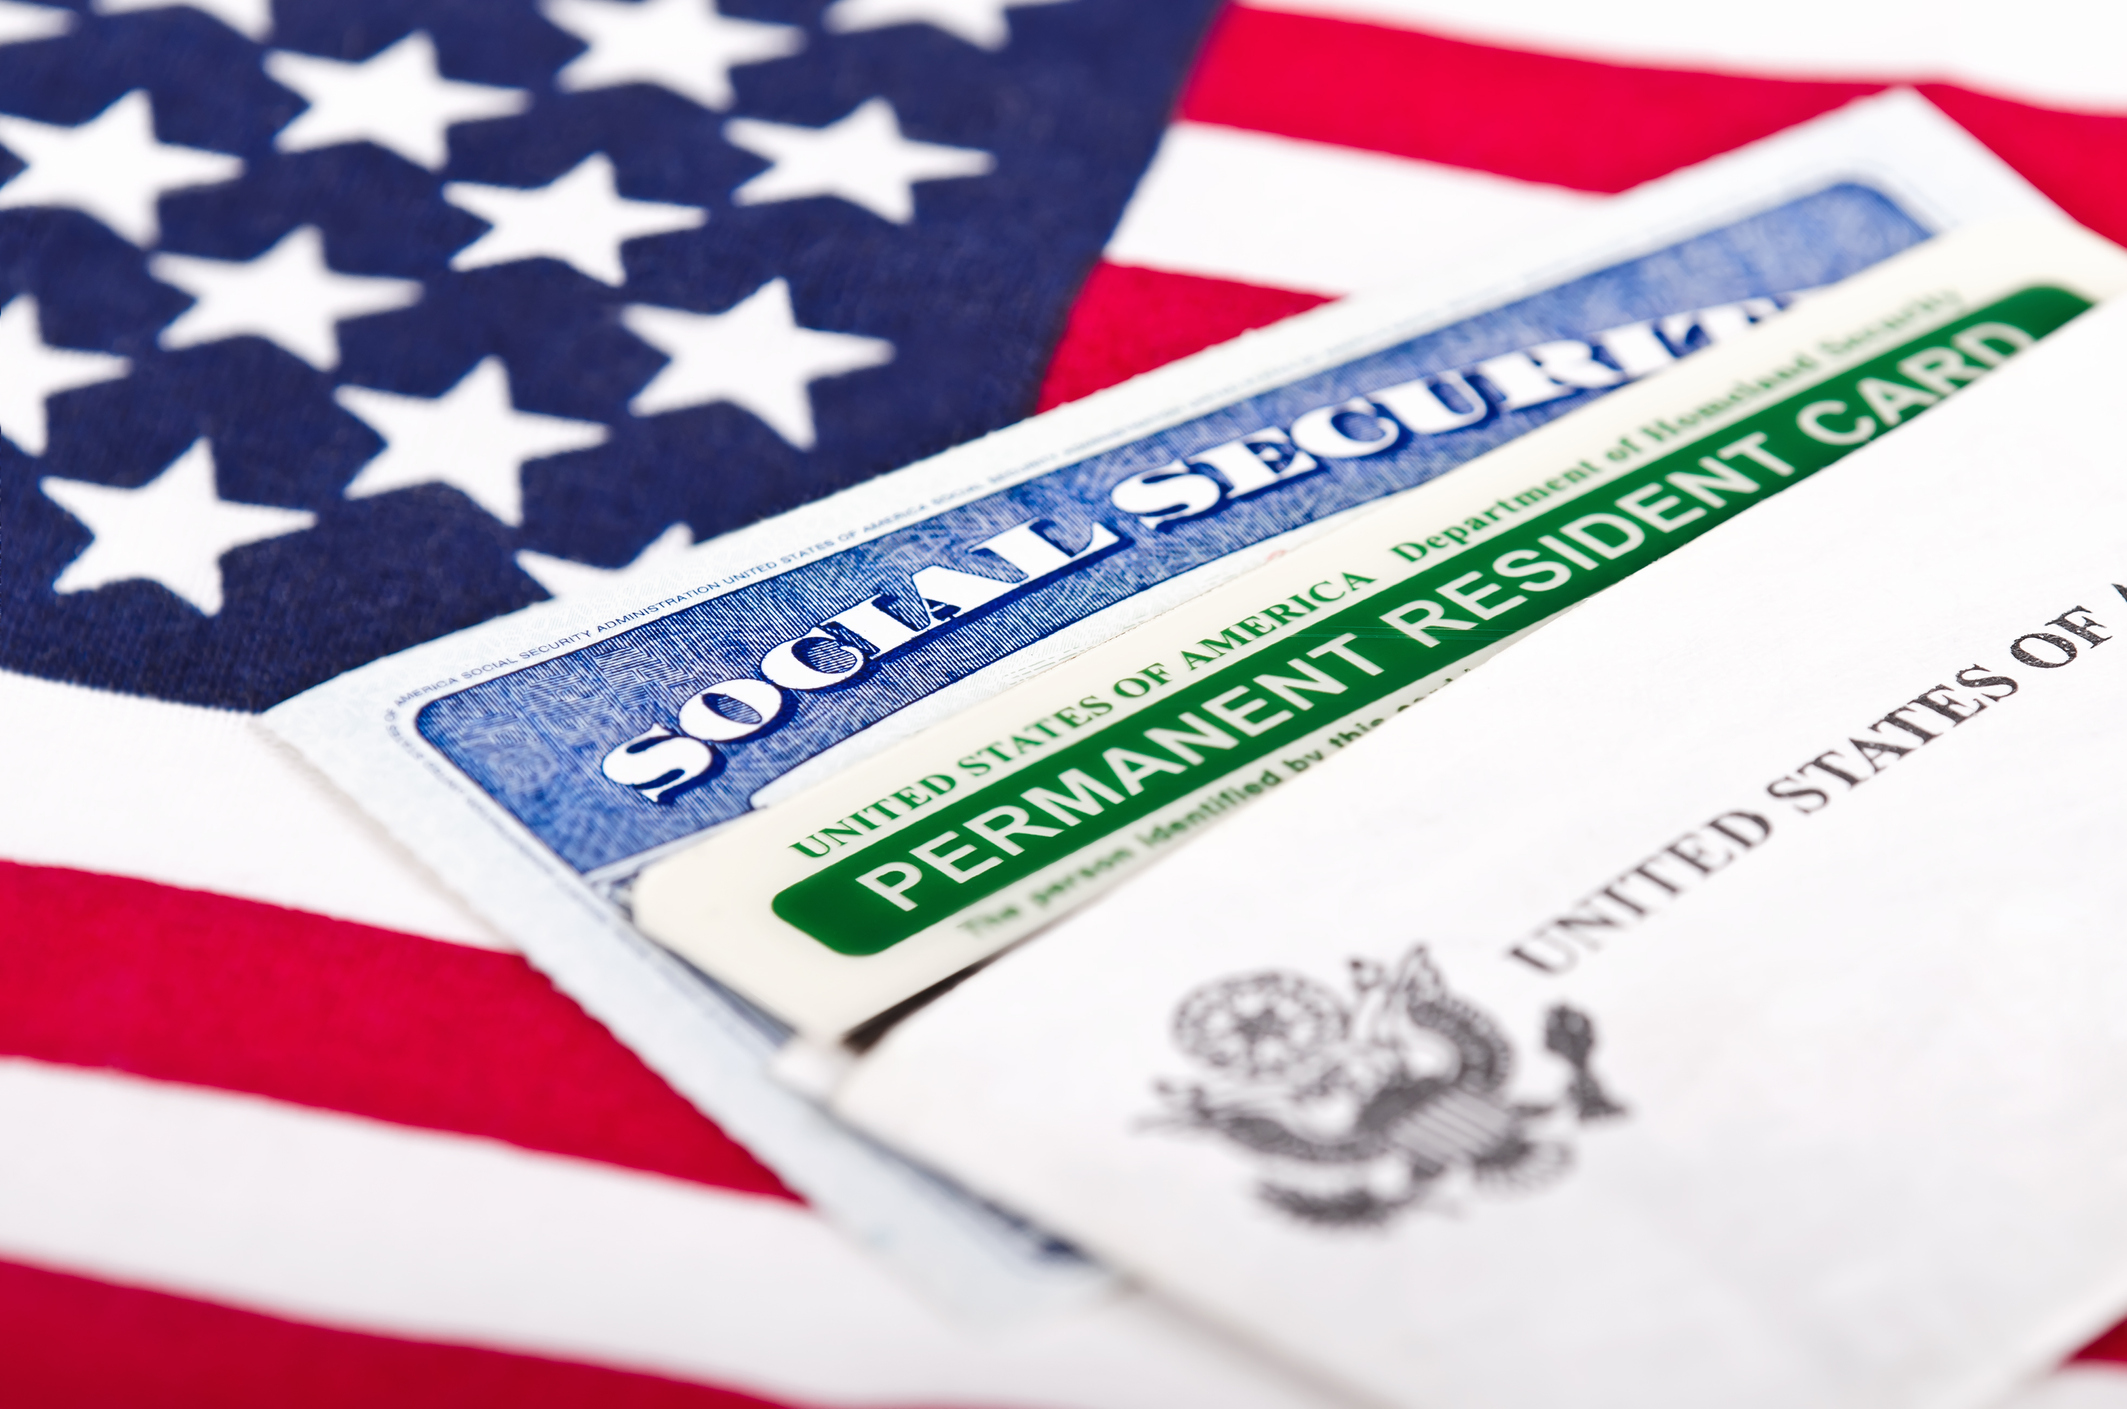 Green card and social security card on top of American flag